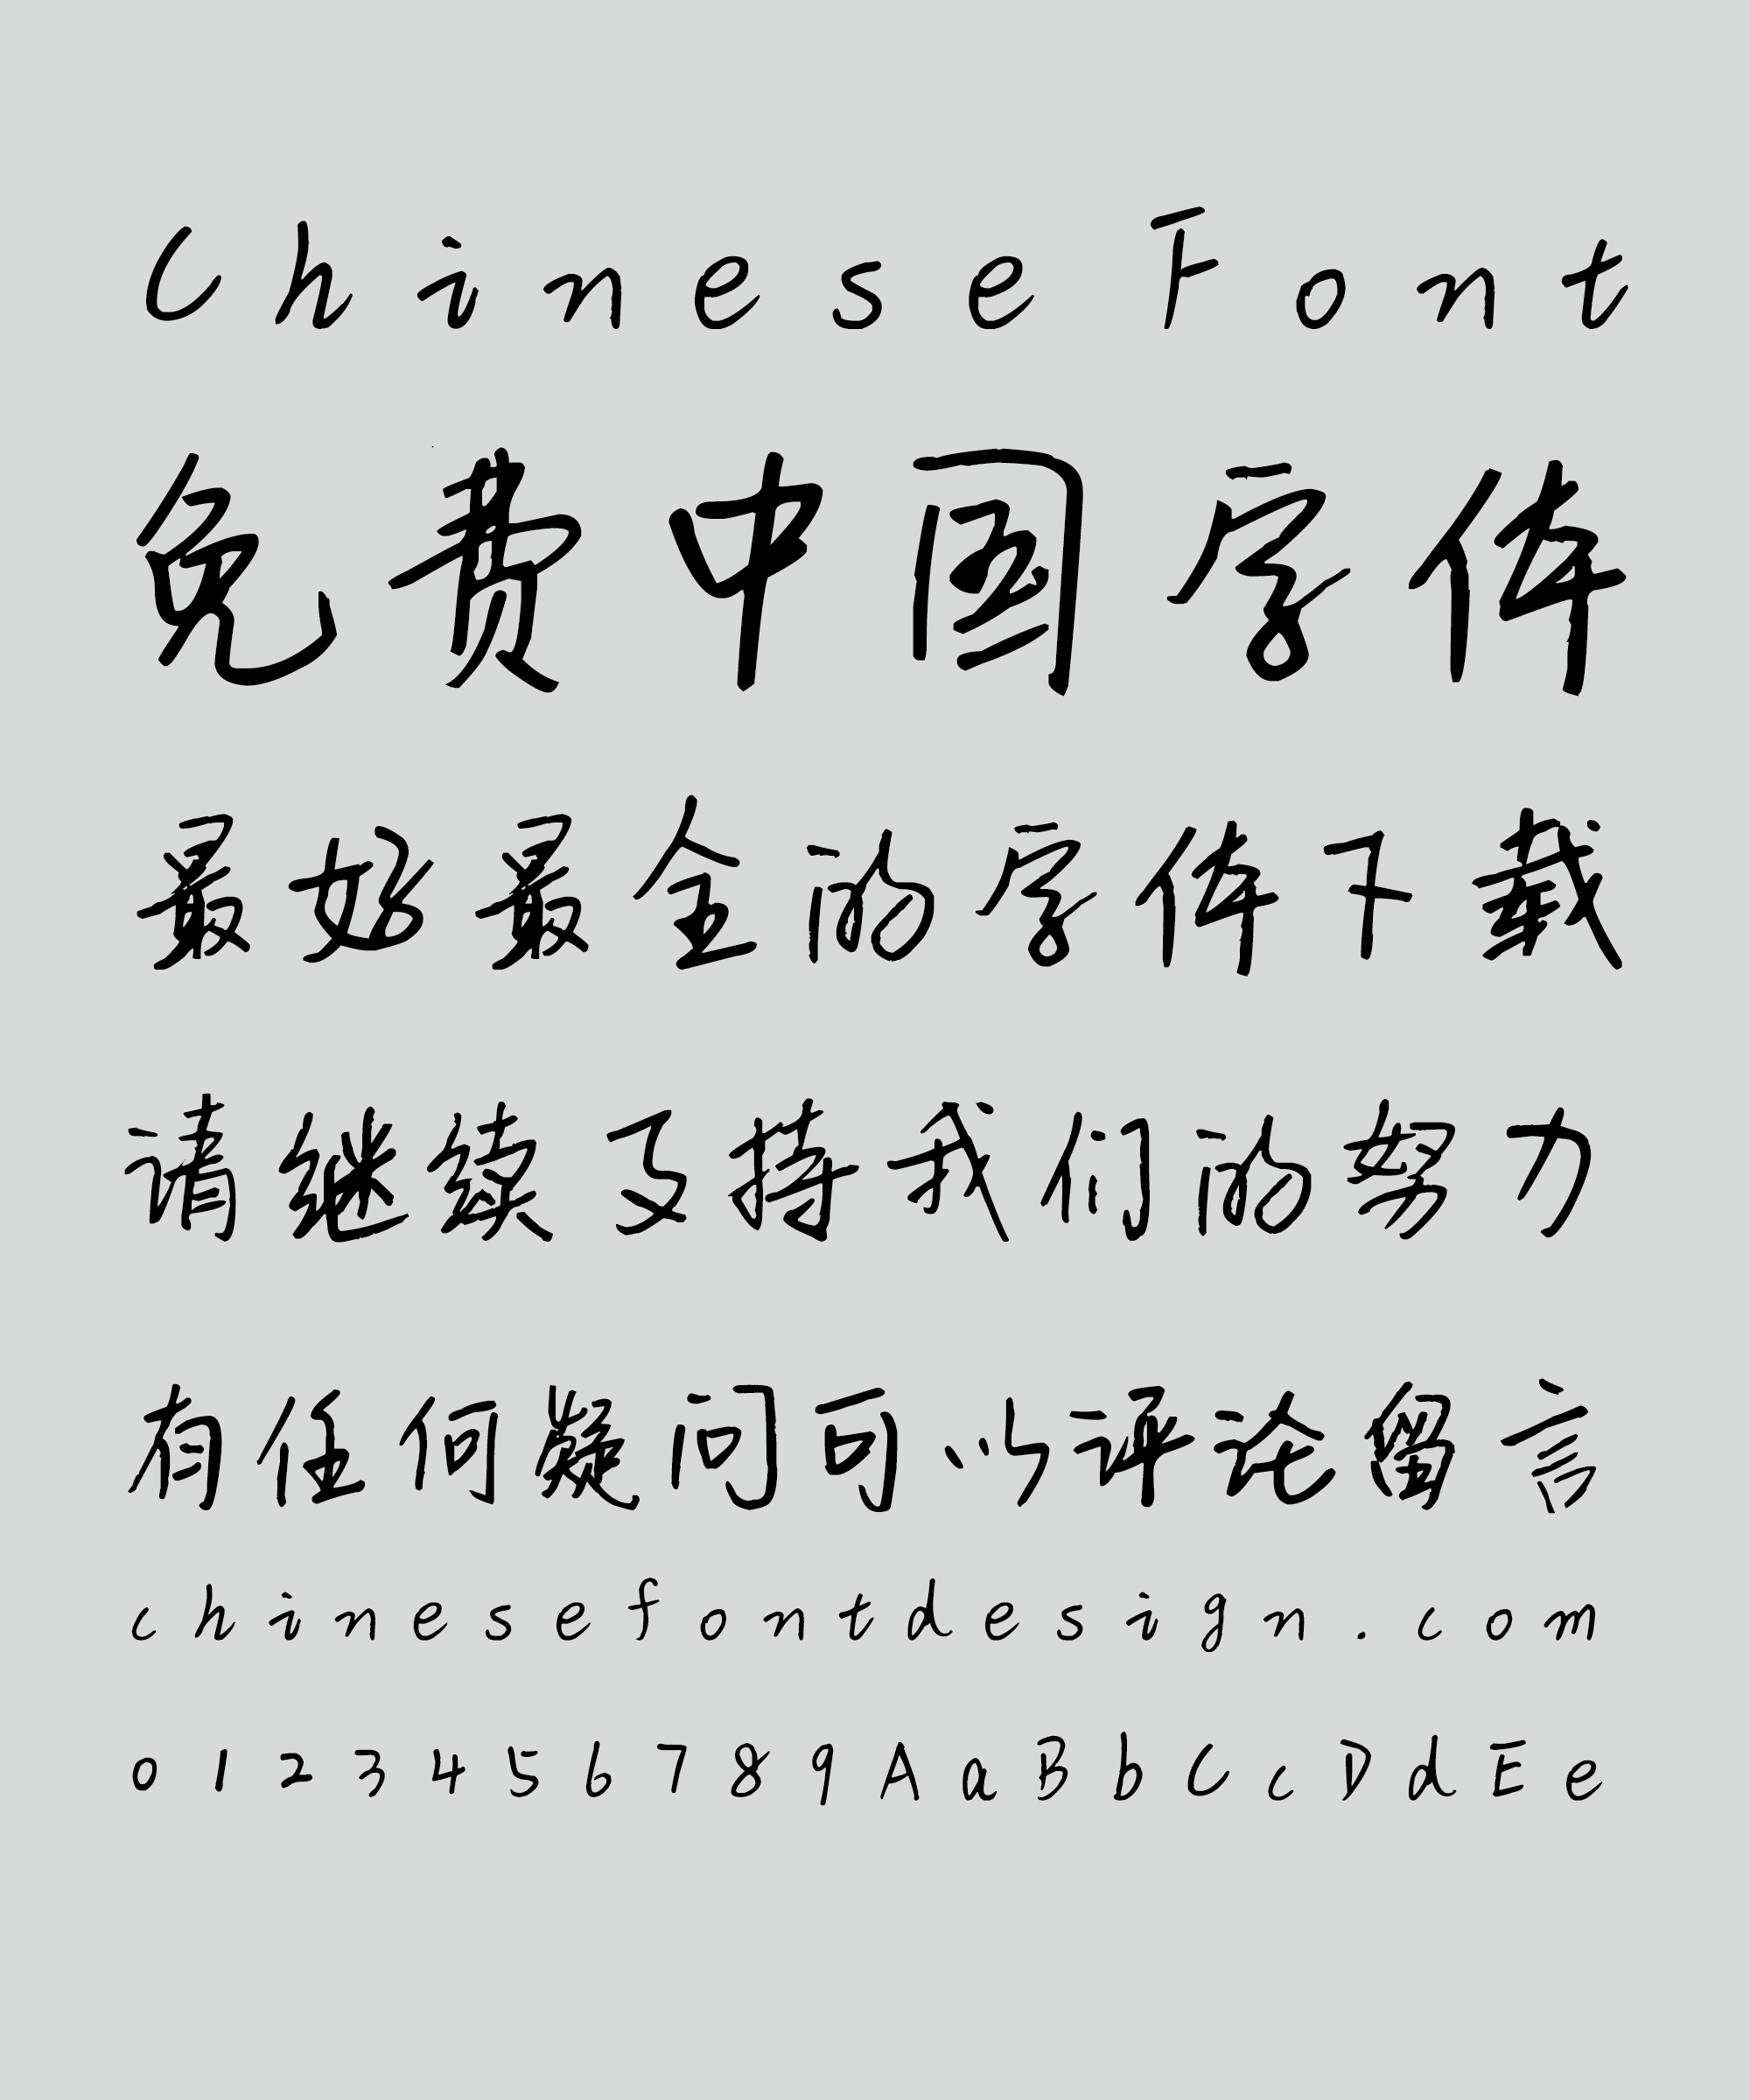 photoshop chinese font free download